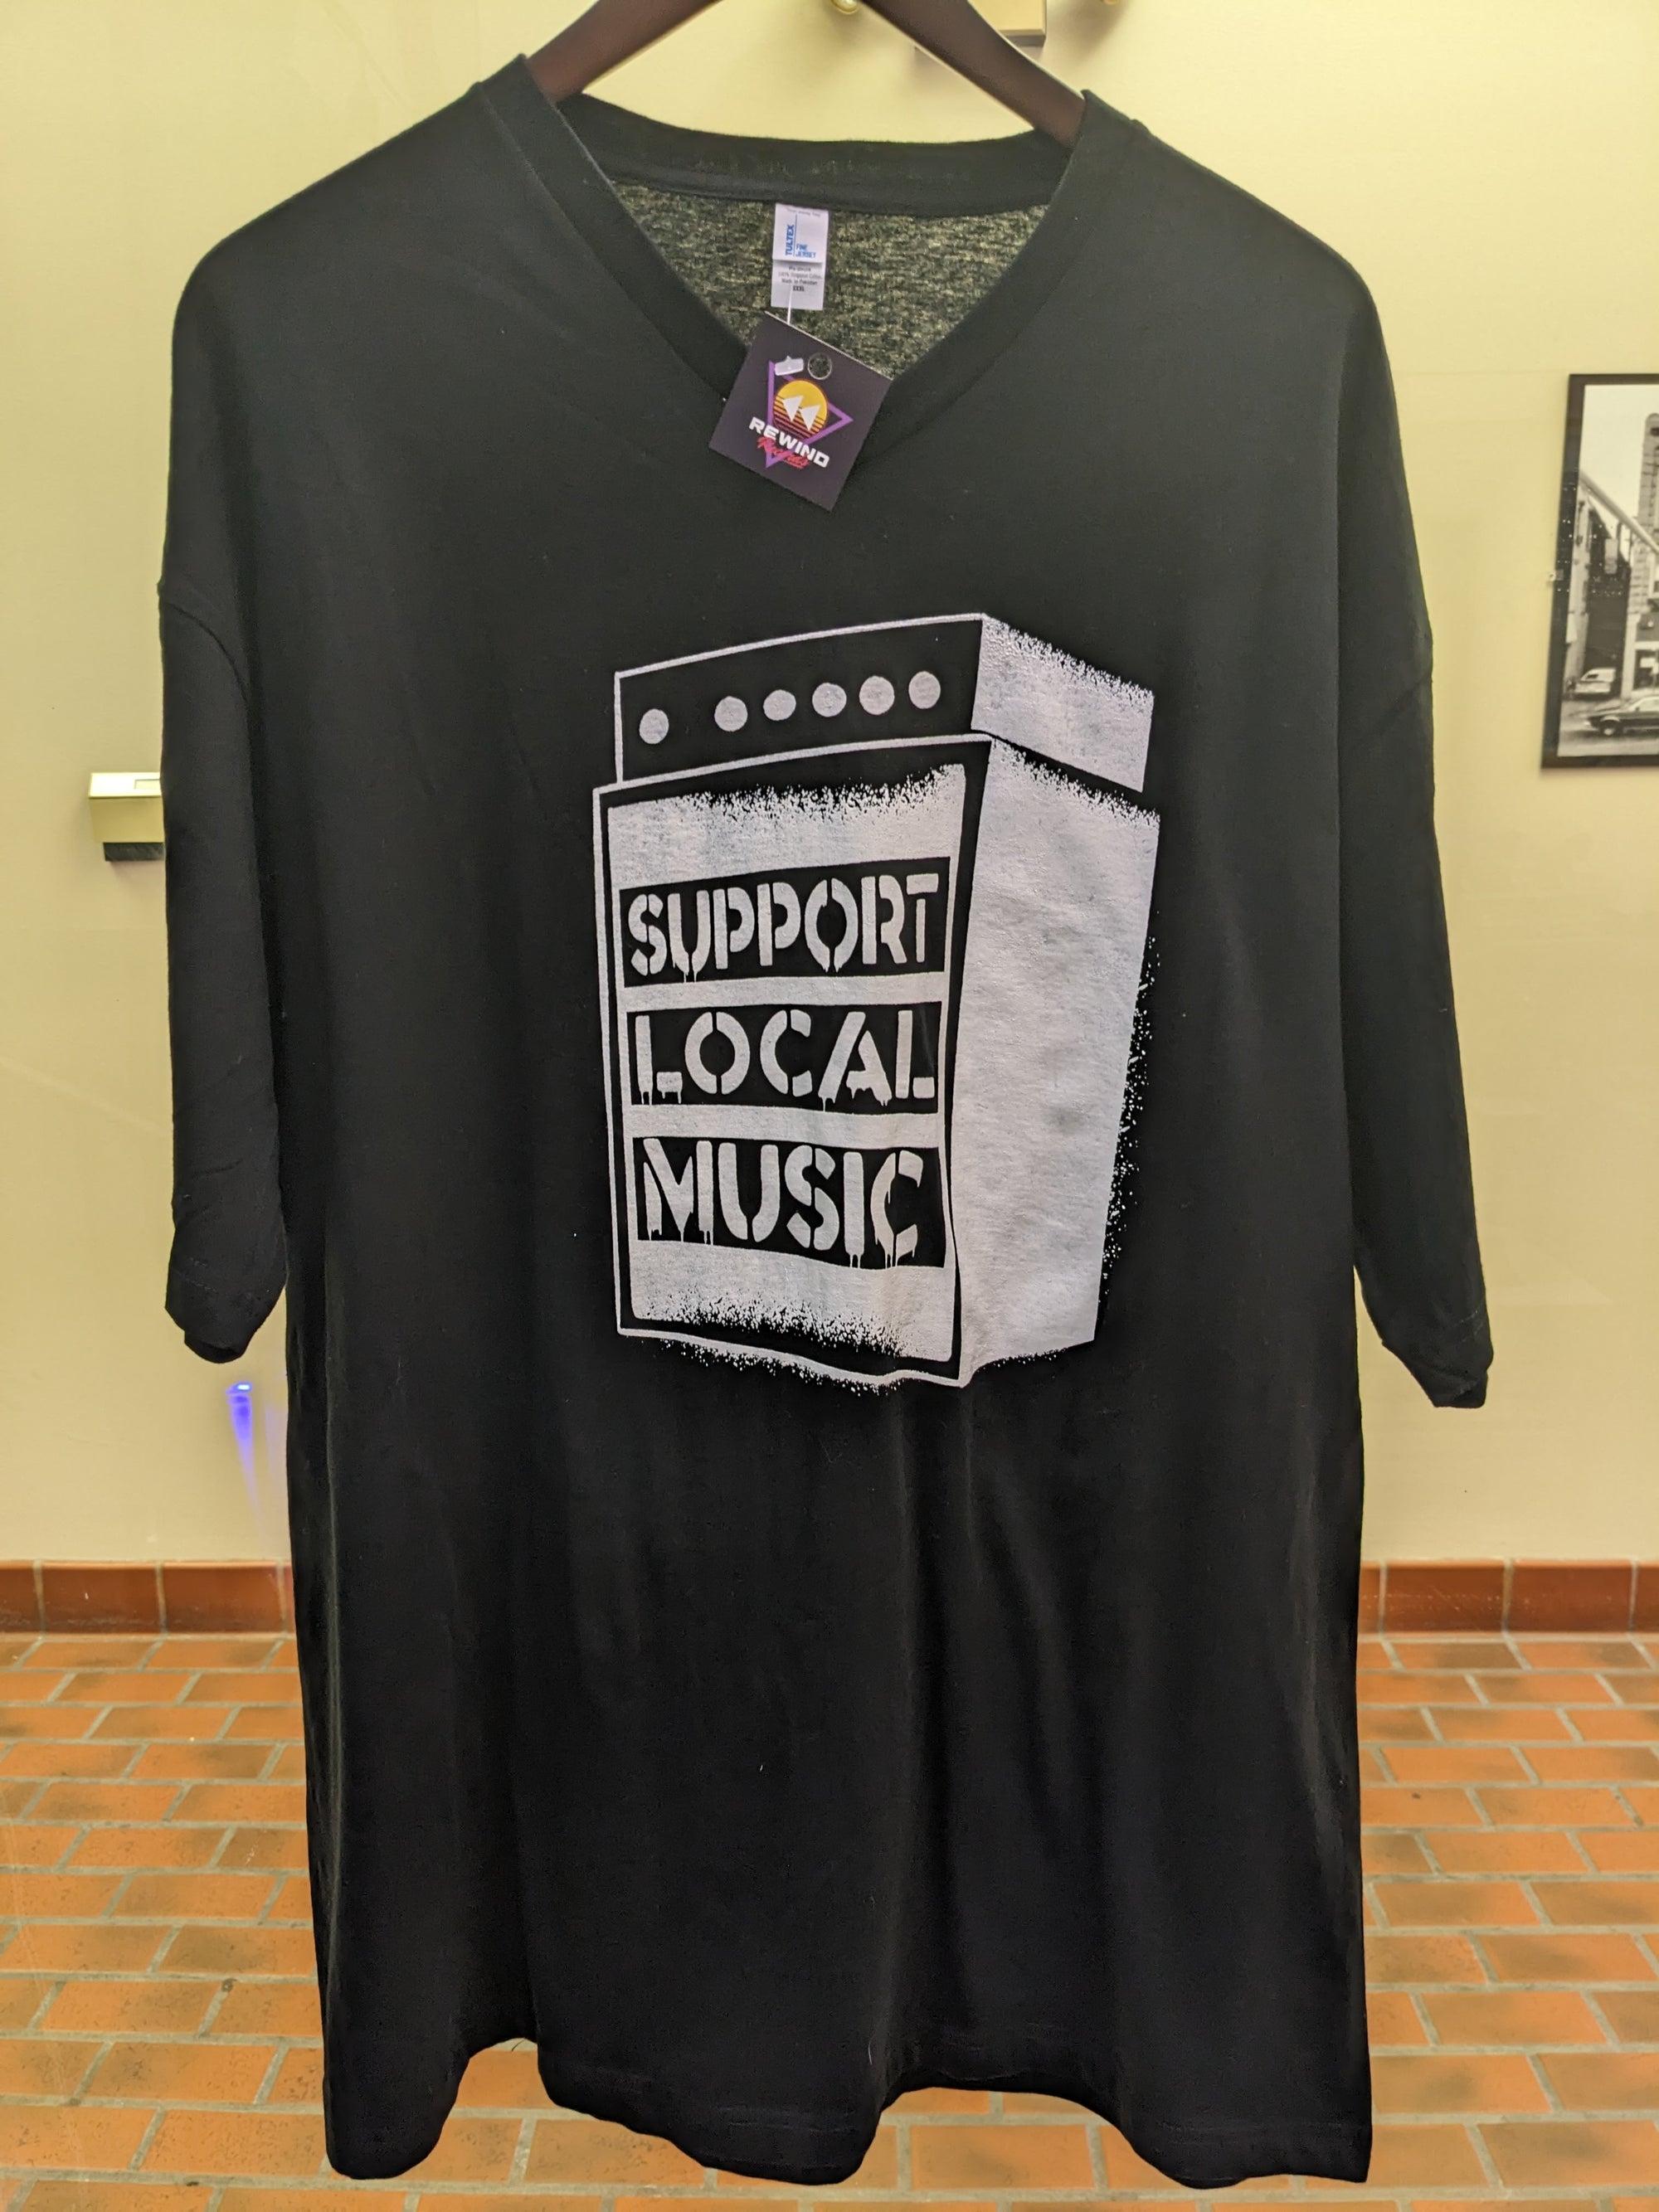 Support Local Music - 3XL